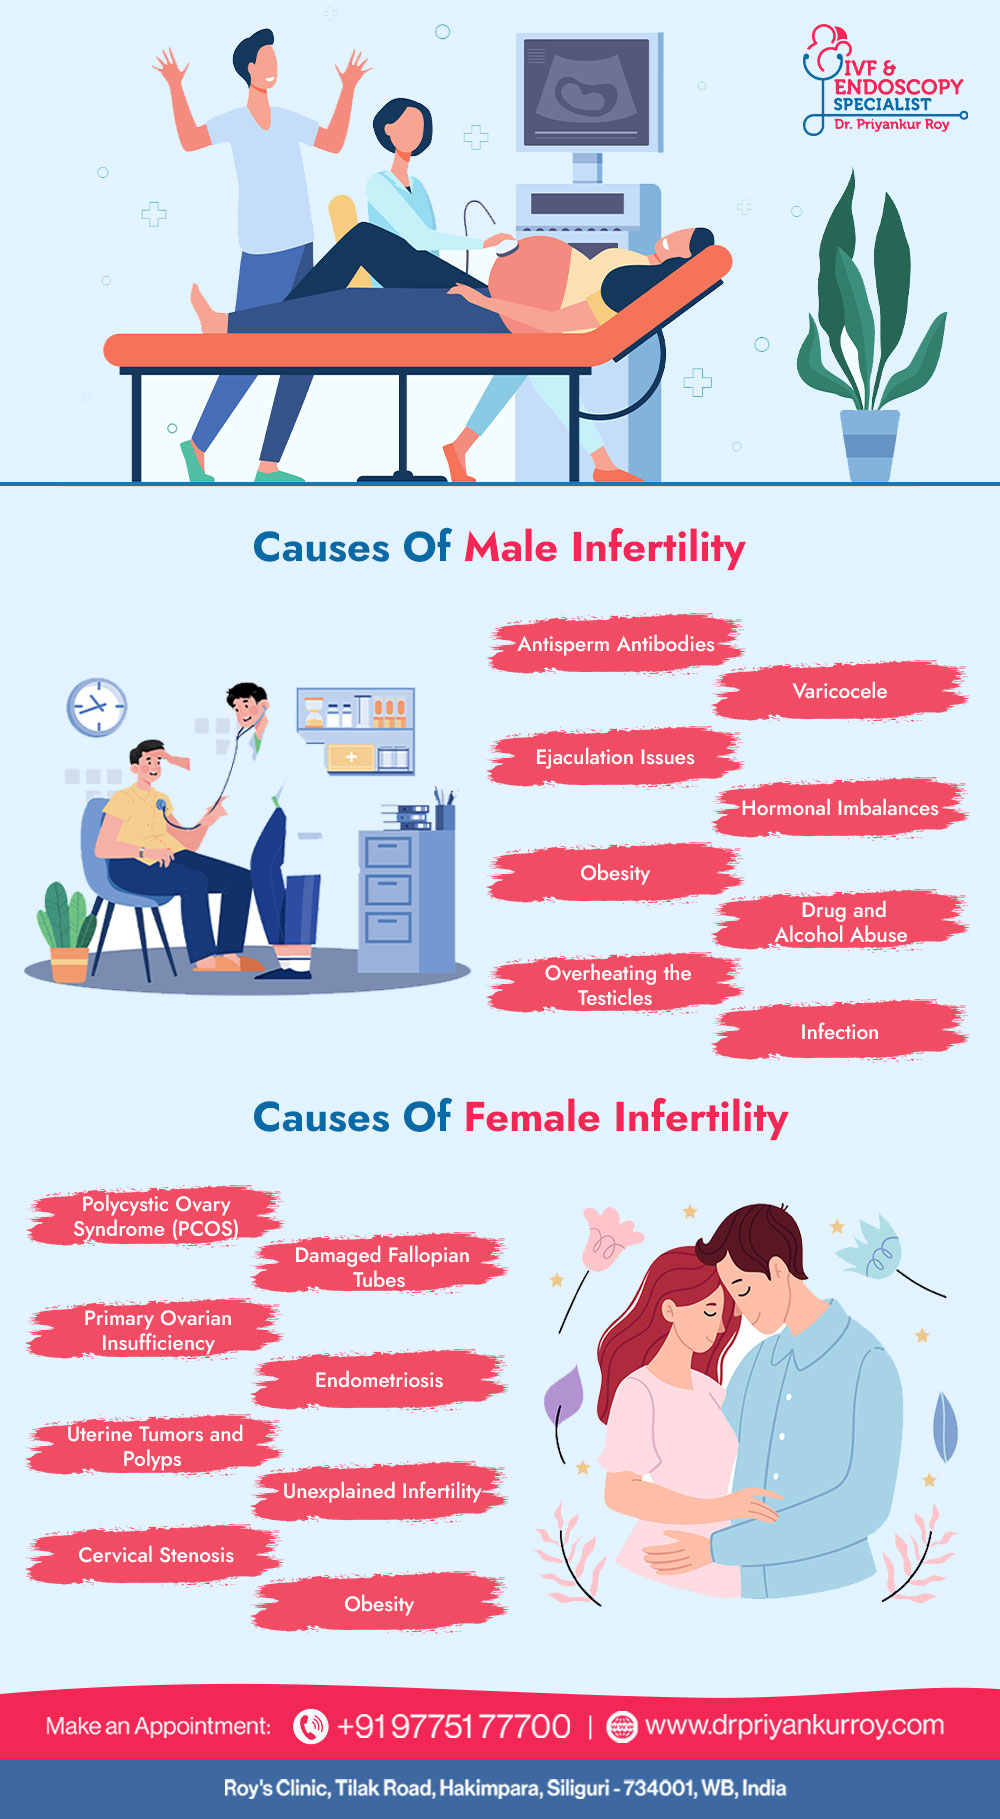 Understanding The Probable Causes Behind Infertility